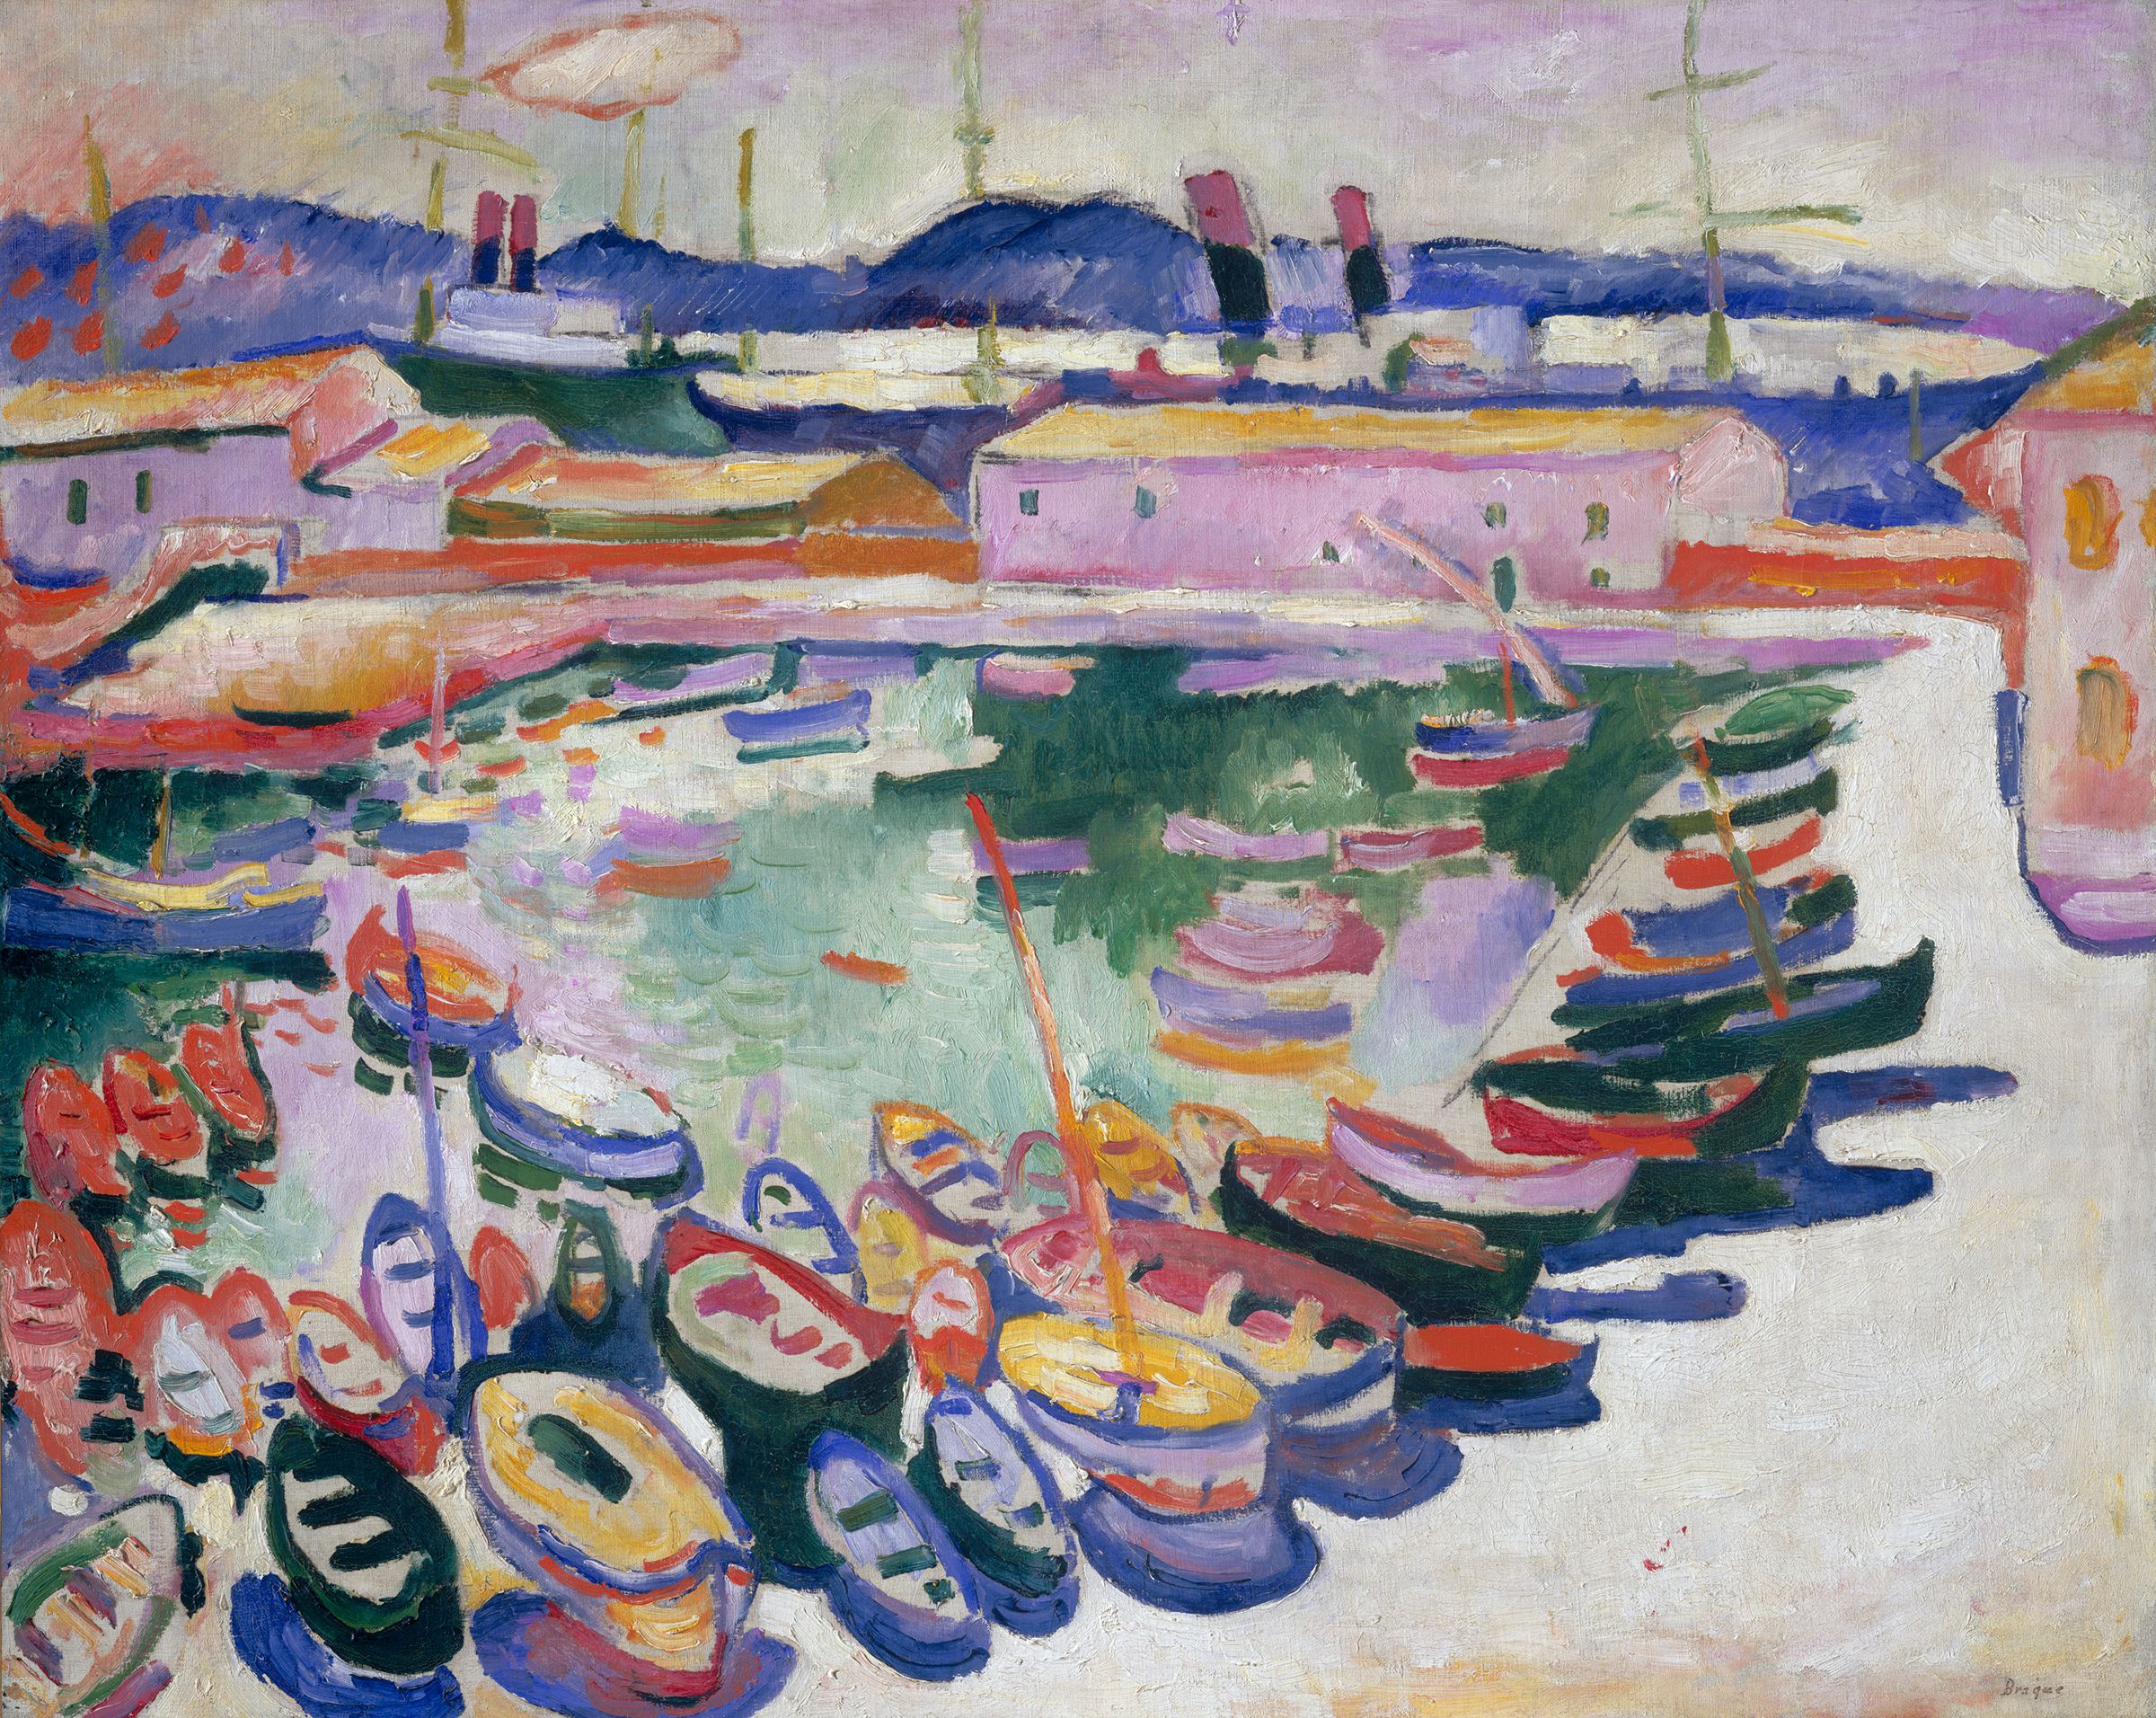 George Braque: Retrospective for Other Cubism Inventor